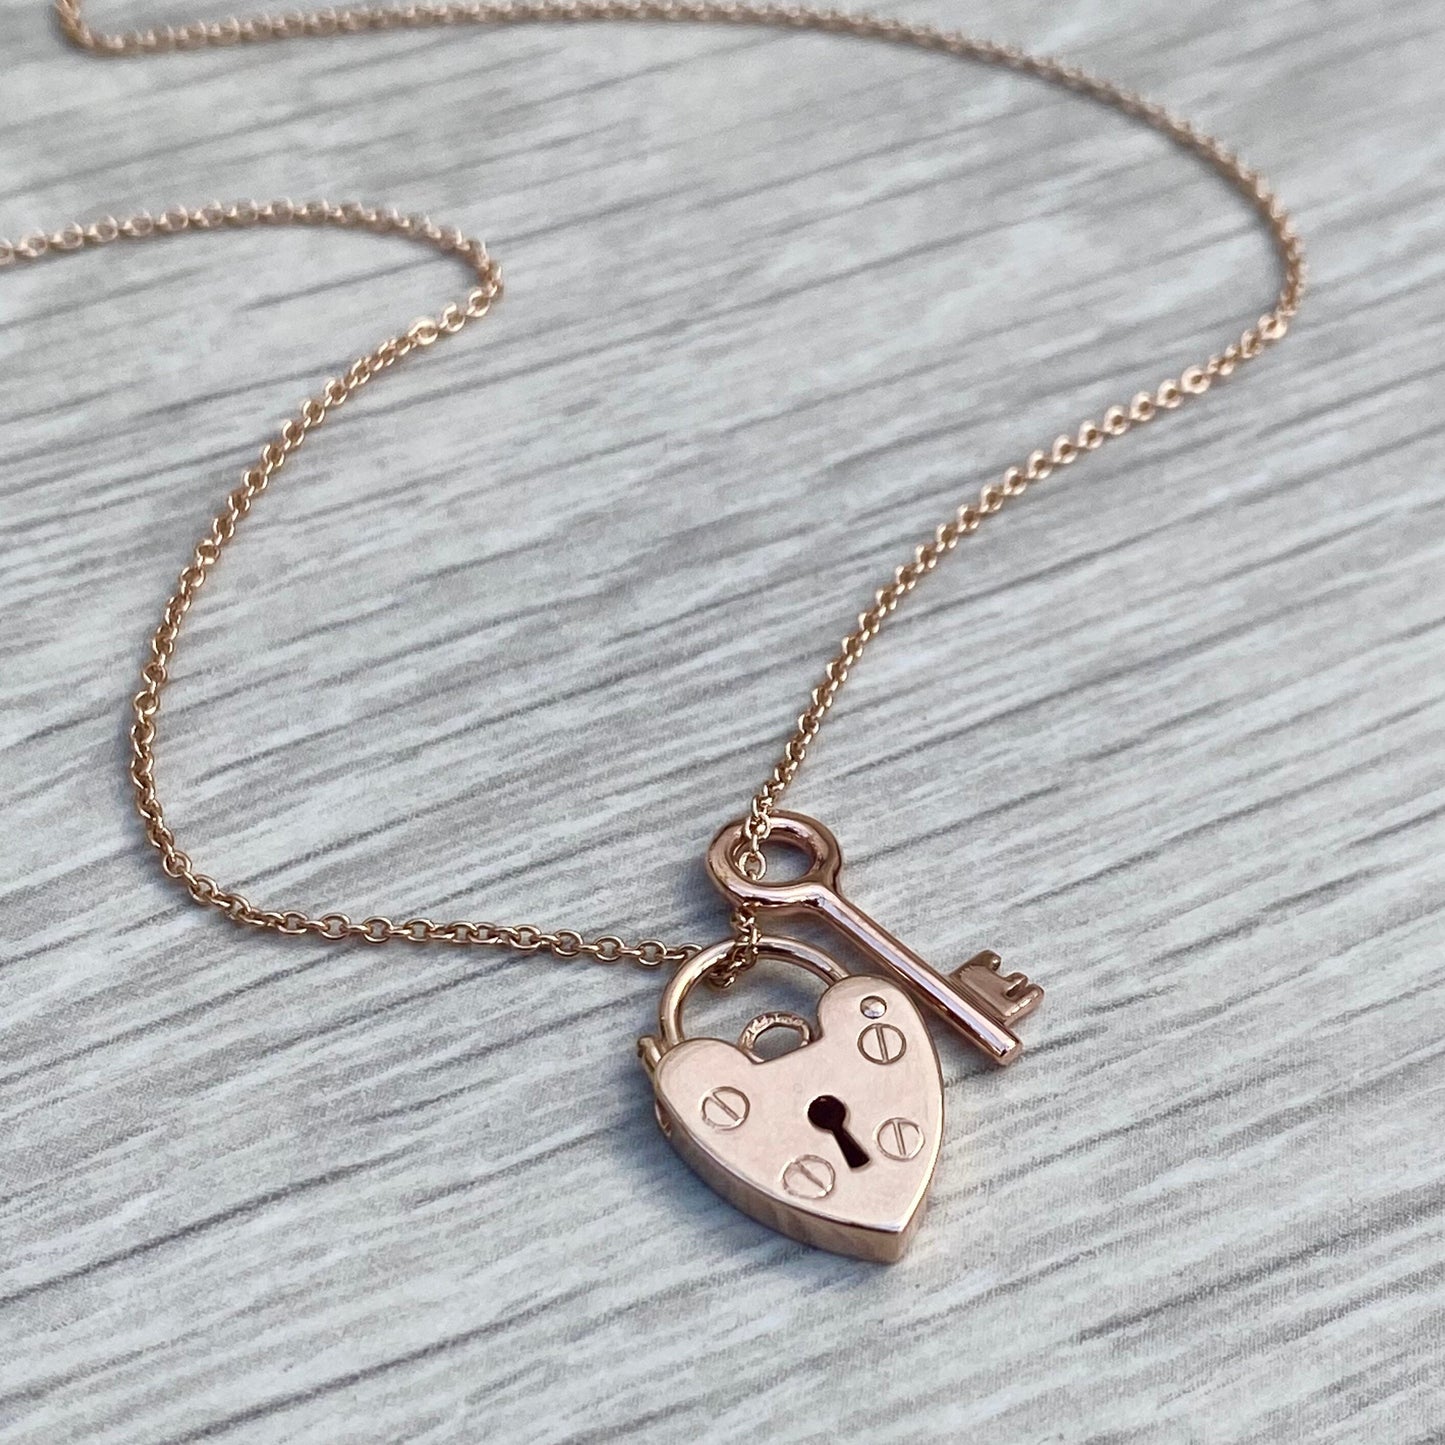 9ct solid rose gold heart padlock and small key charm pendants on a 1.2mm wide trace chain